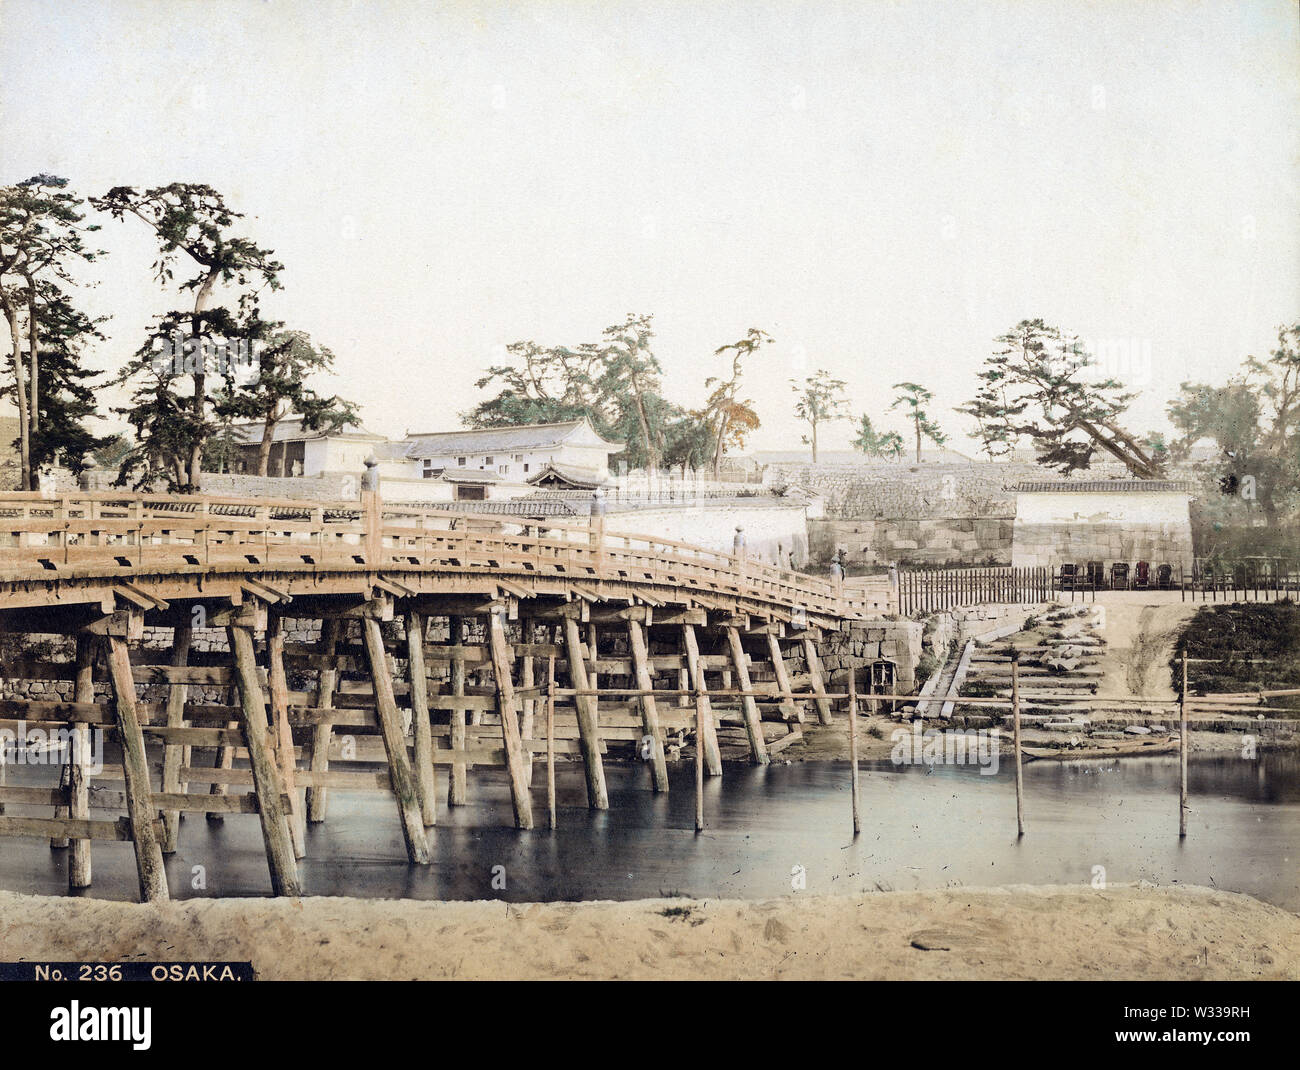 [ 1860s Japan - Kyobashi Bridge at Osaka Castle ] —   An extremely rare view of the wooden Kyobashi Bridge crossing the Neyagawa River (寝屋川) at Osaka Castle, Osaka, ca. 1860s (early Meiji). The bridge, first erected in 1623, was named Kyobashi because the road it connected to lead to Kyoto (京街道, Kyokaido).  In 1885 (Meiji 18) the bridge was washed away during a flood and replaced with an iron construction.  19th century vintage albumen photograph. Stock Photo